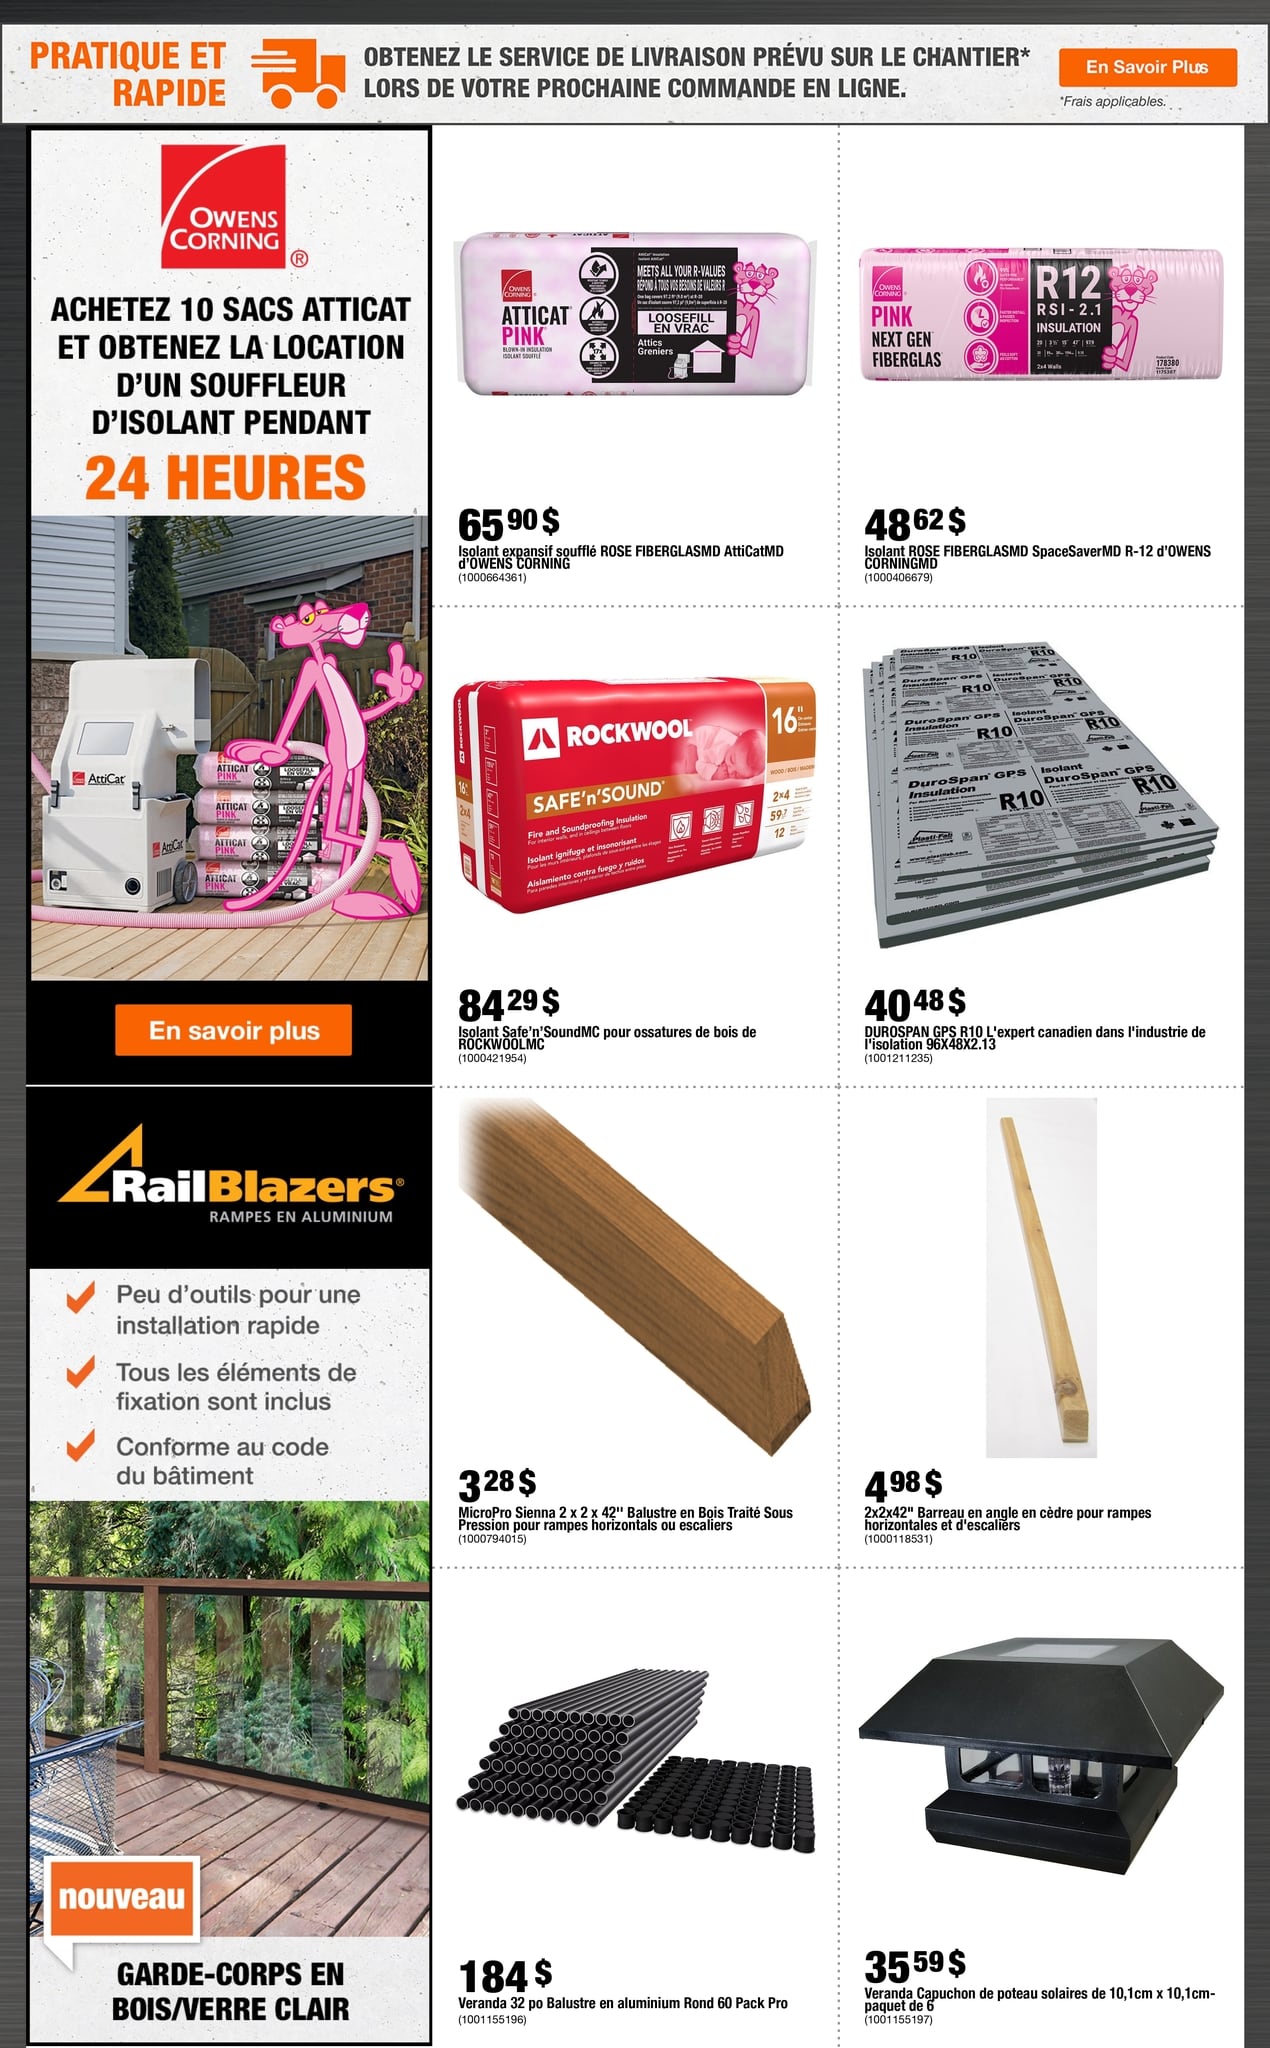 Circulaire Home Depot - PRO - Page 2